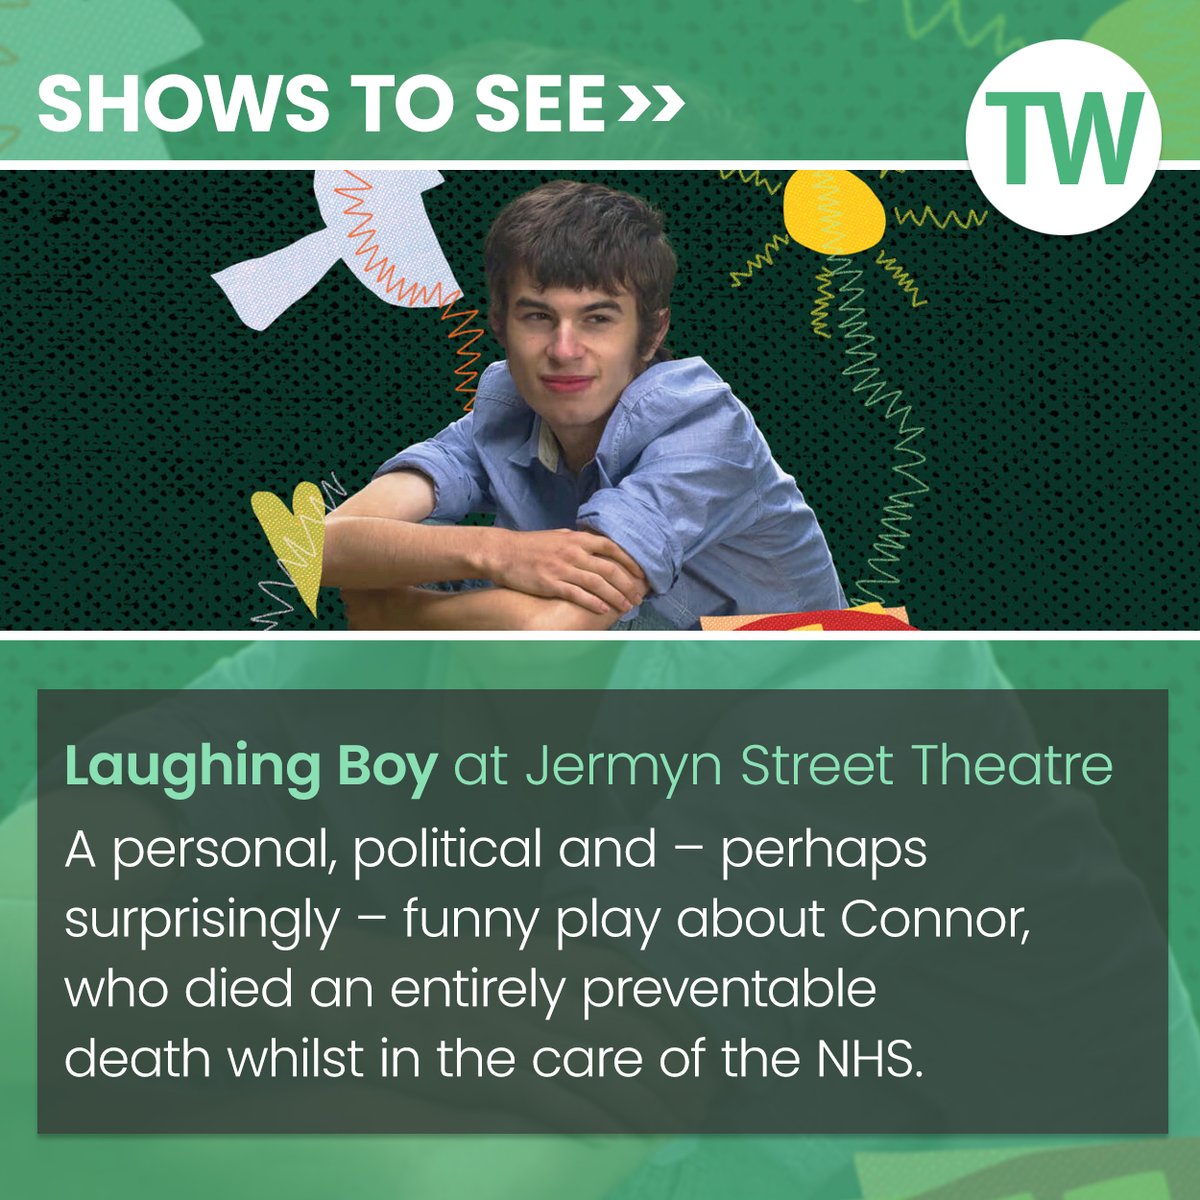 Among our recommended shows to see this week: ‘Laughing Boy’ by Sara Ryan at Jermyn Street Theatre. Get more show tips here: bit.ly/4b3Mh36 @JSTheatre